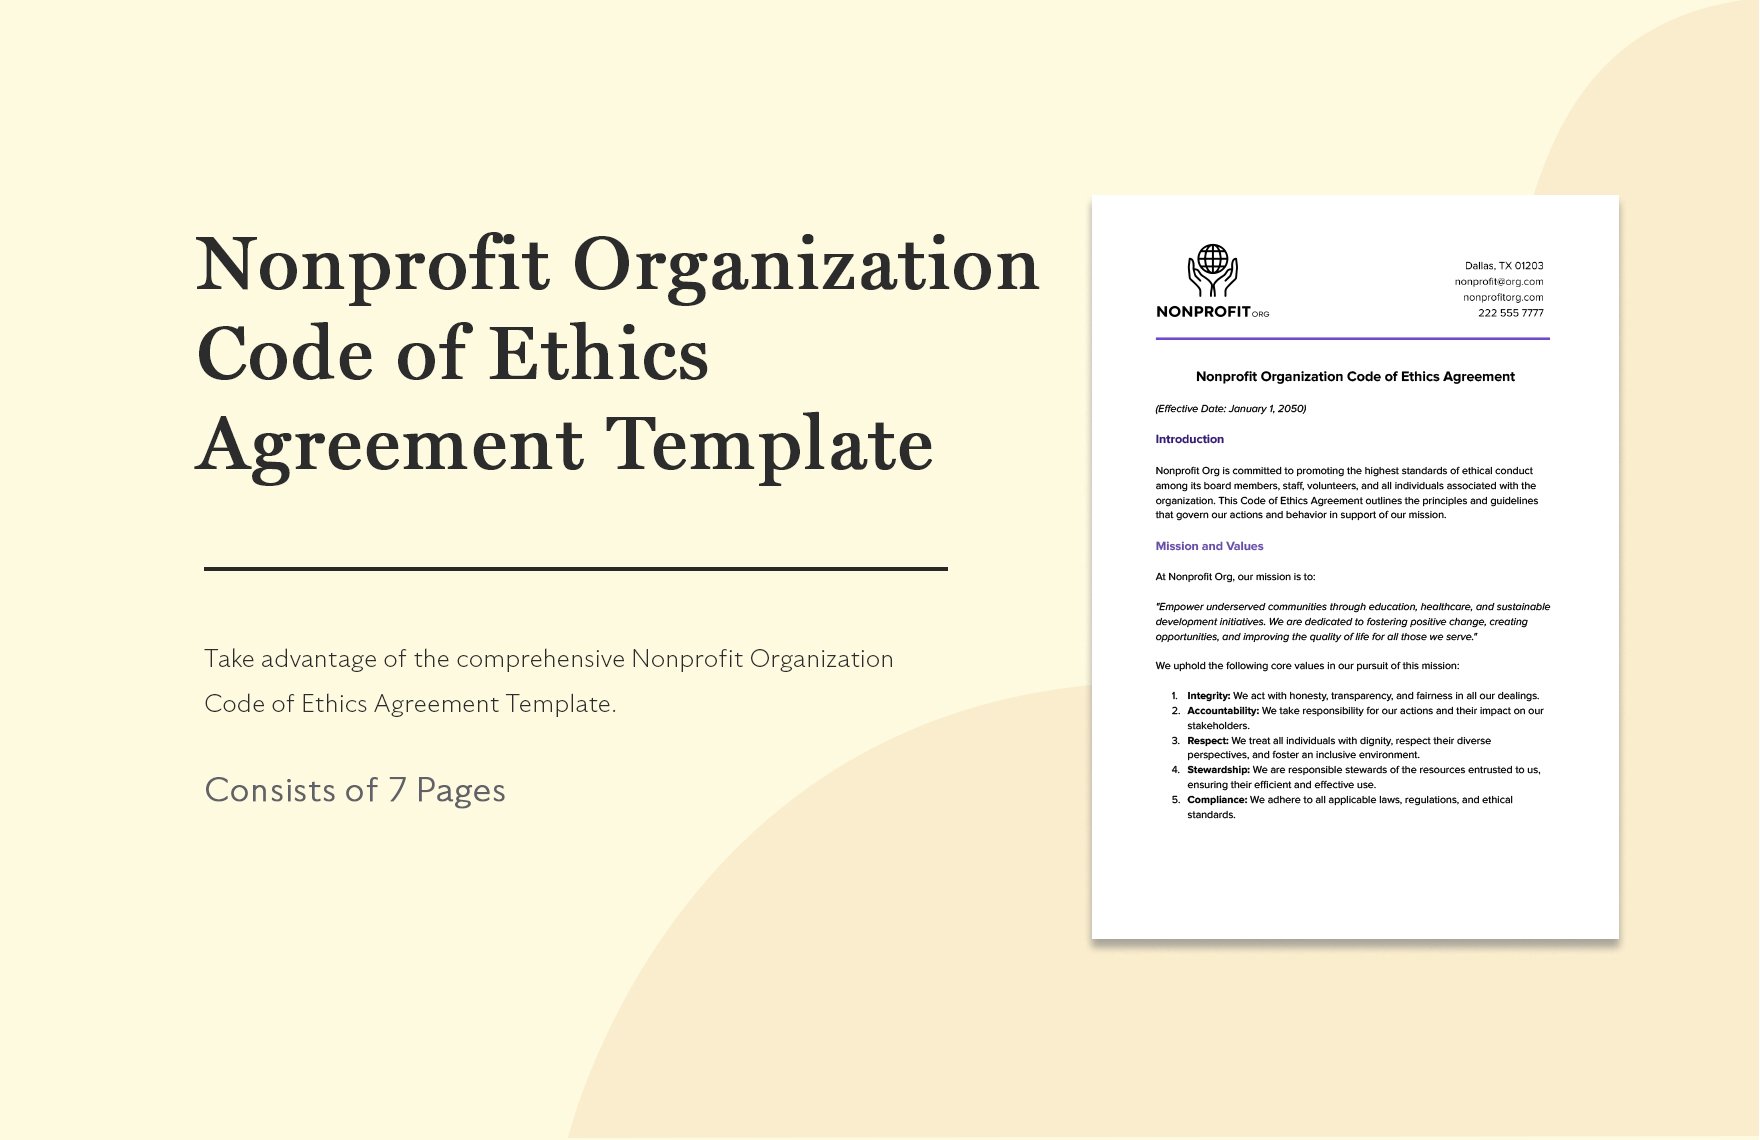 Nonprofit Organization Code of Ethics Agreement Template